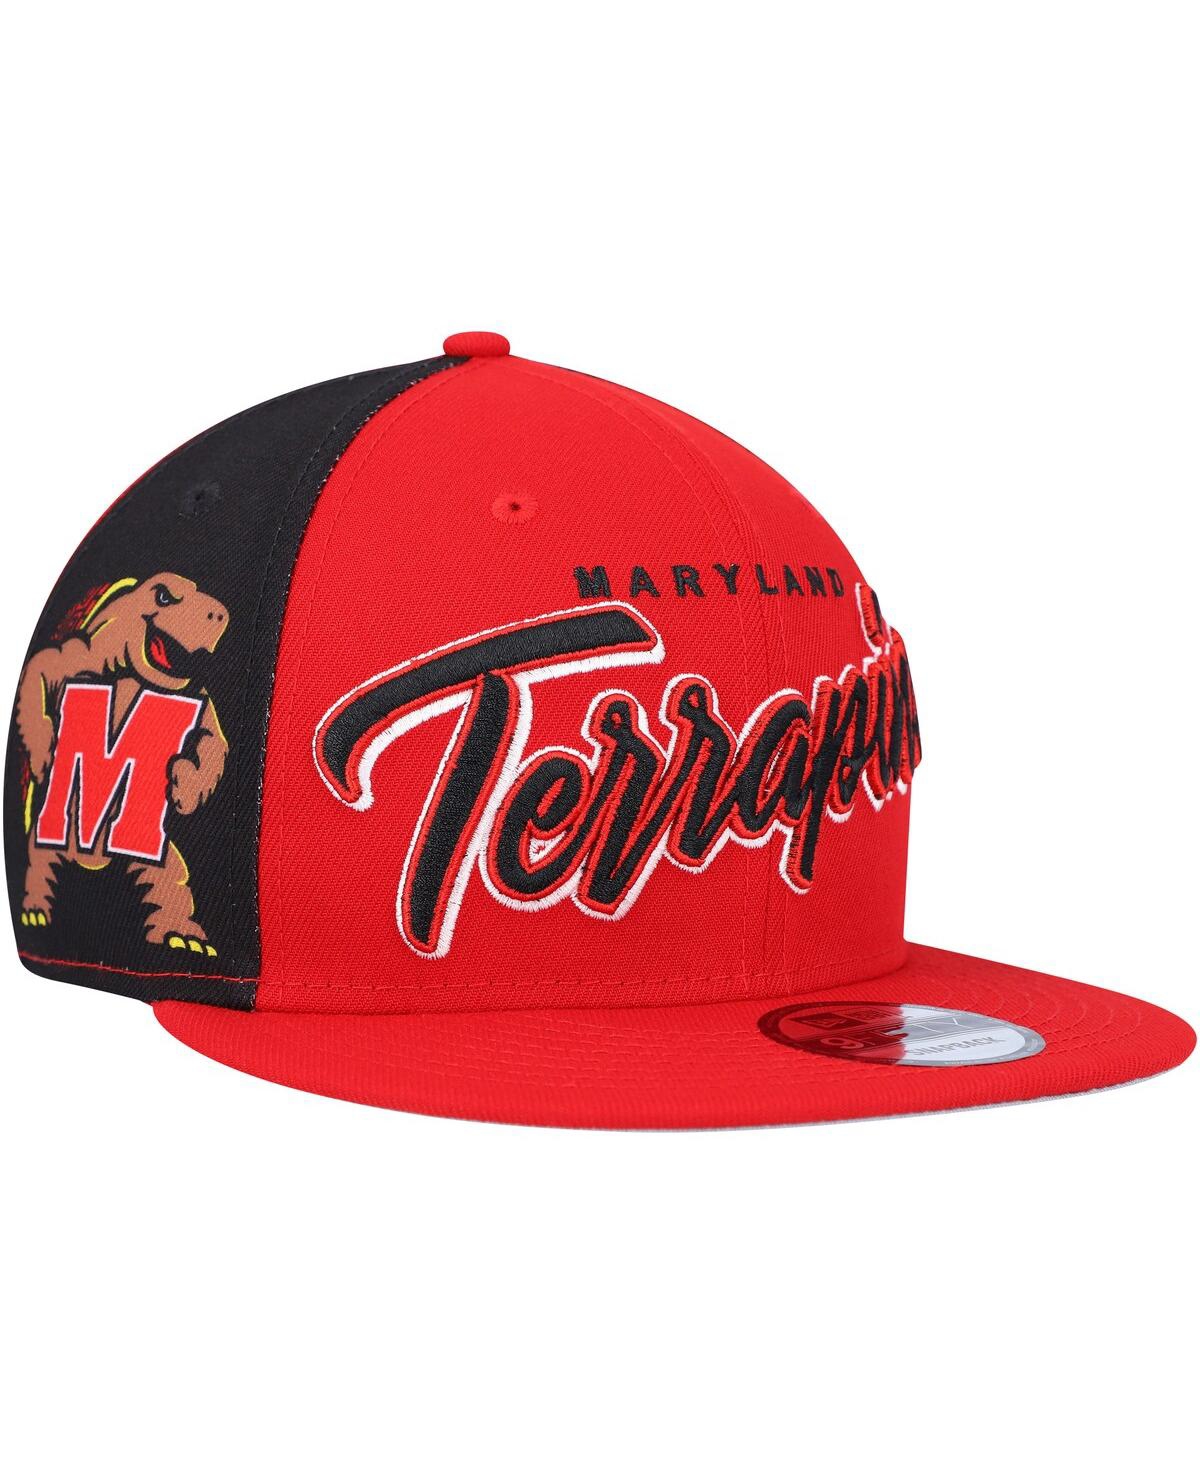 Shop New Era Men's  Red Maryland Terrapins Outright 9fifty Snapback Hat